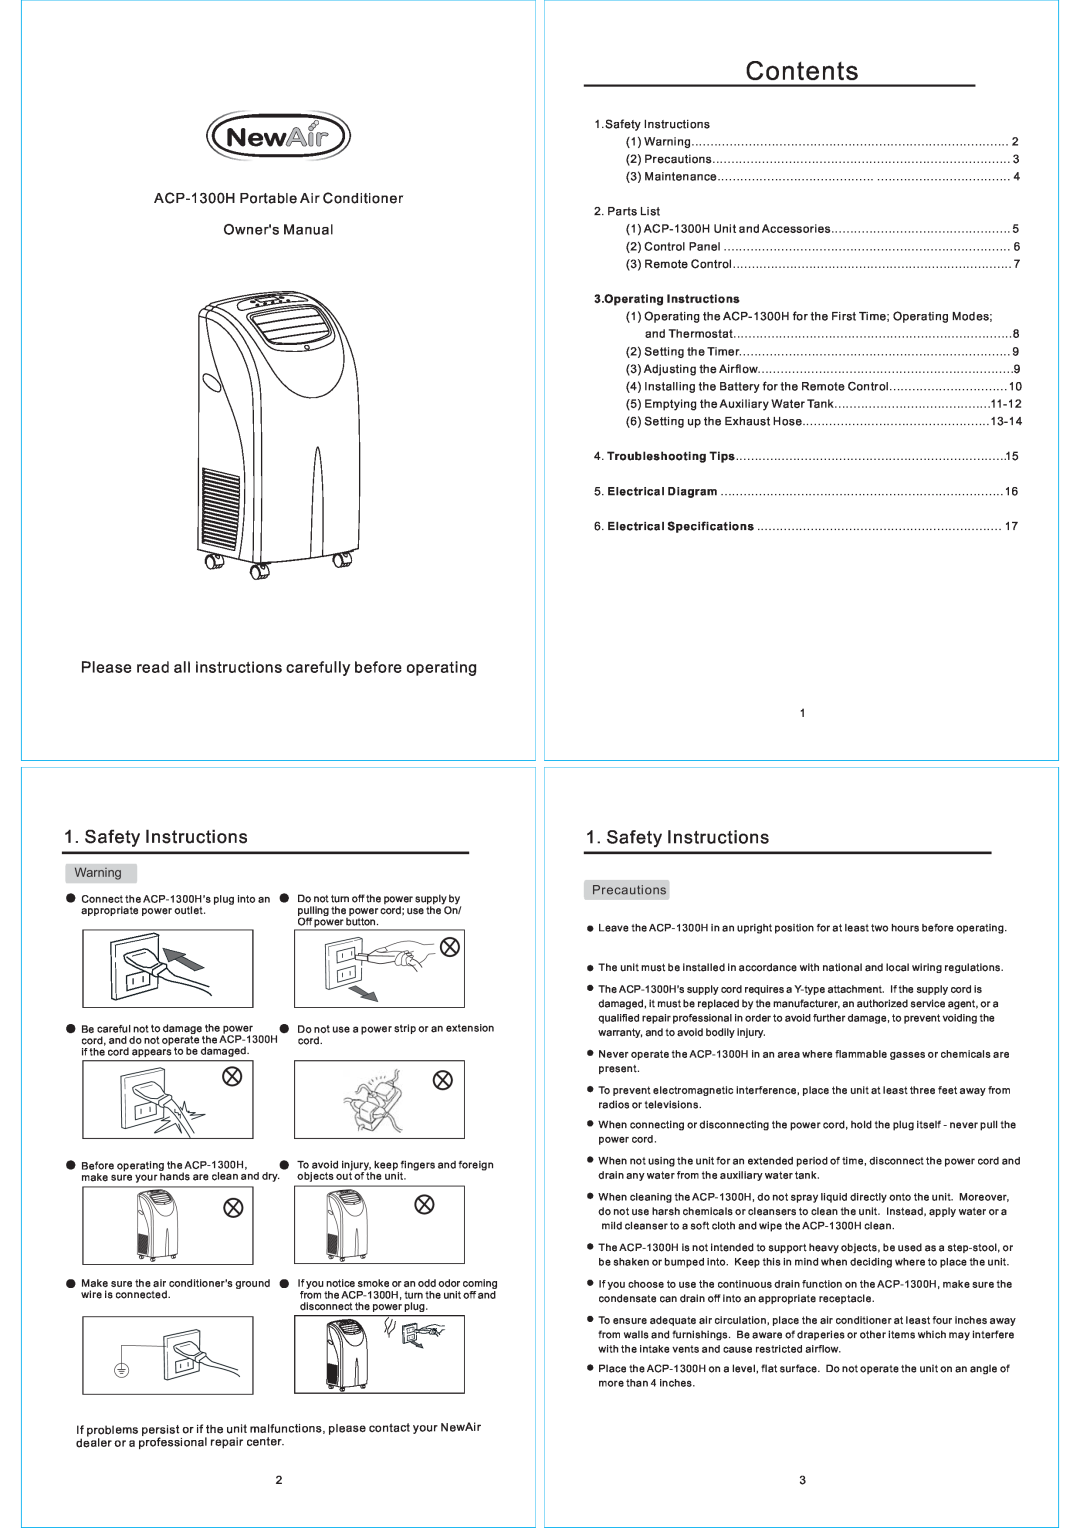 NewAir owner manual Safety Instructions, ACP-1300HPortable Air Conditioner, Operating Instructions 